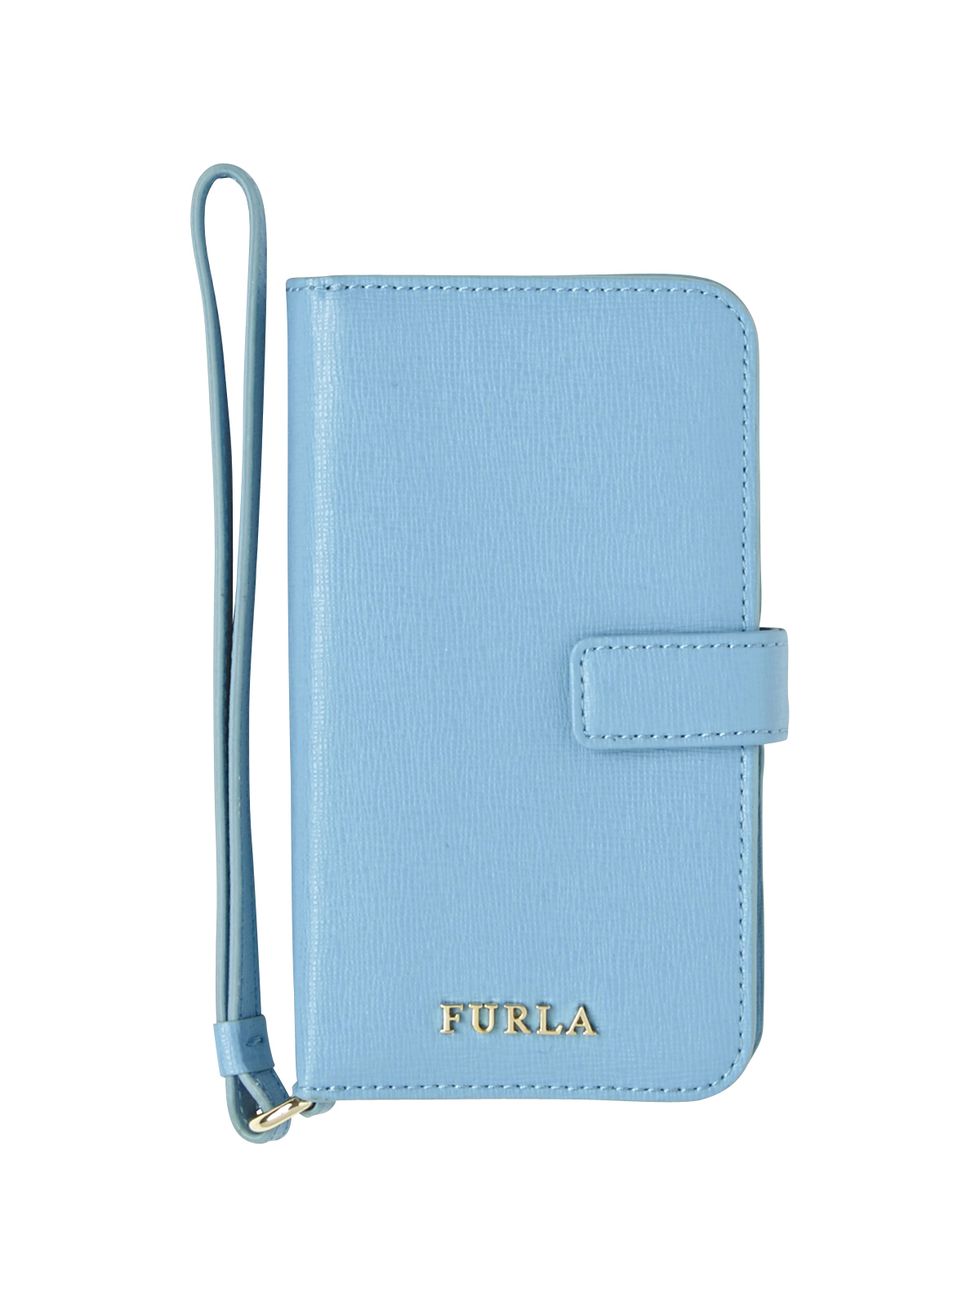 Teal, Aqua, Azure, Turquoise, Electric blue, Handheld device accessory, Wallet, Mat, Mobile phone accessories, 